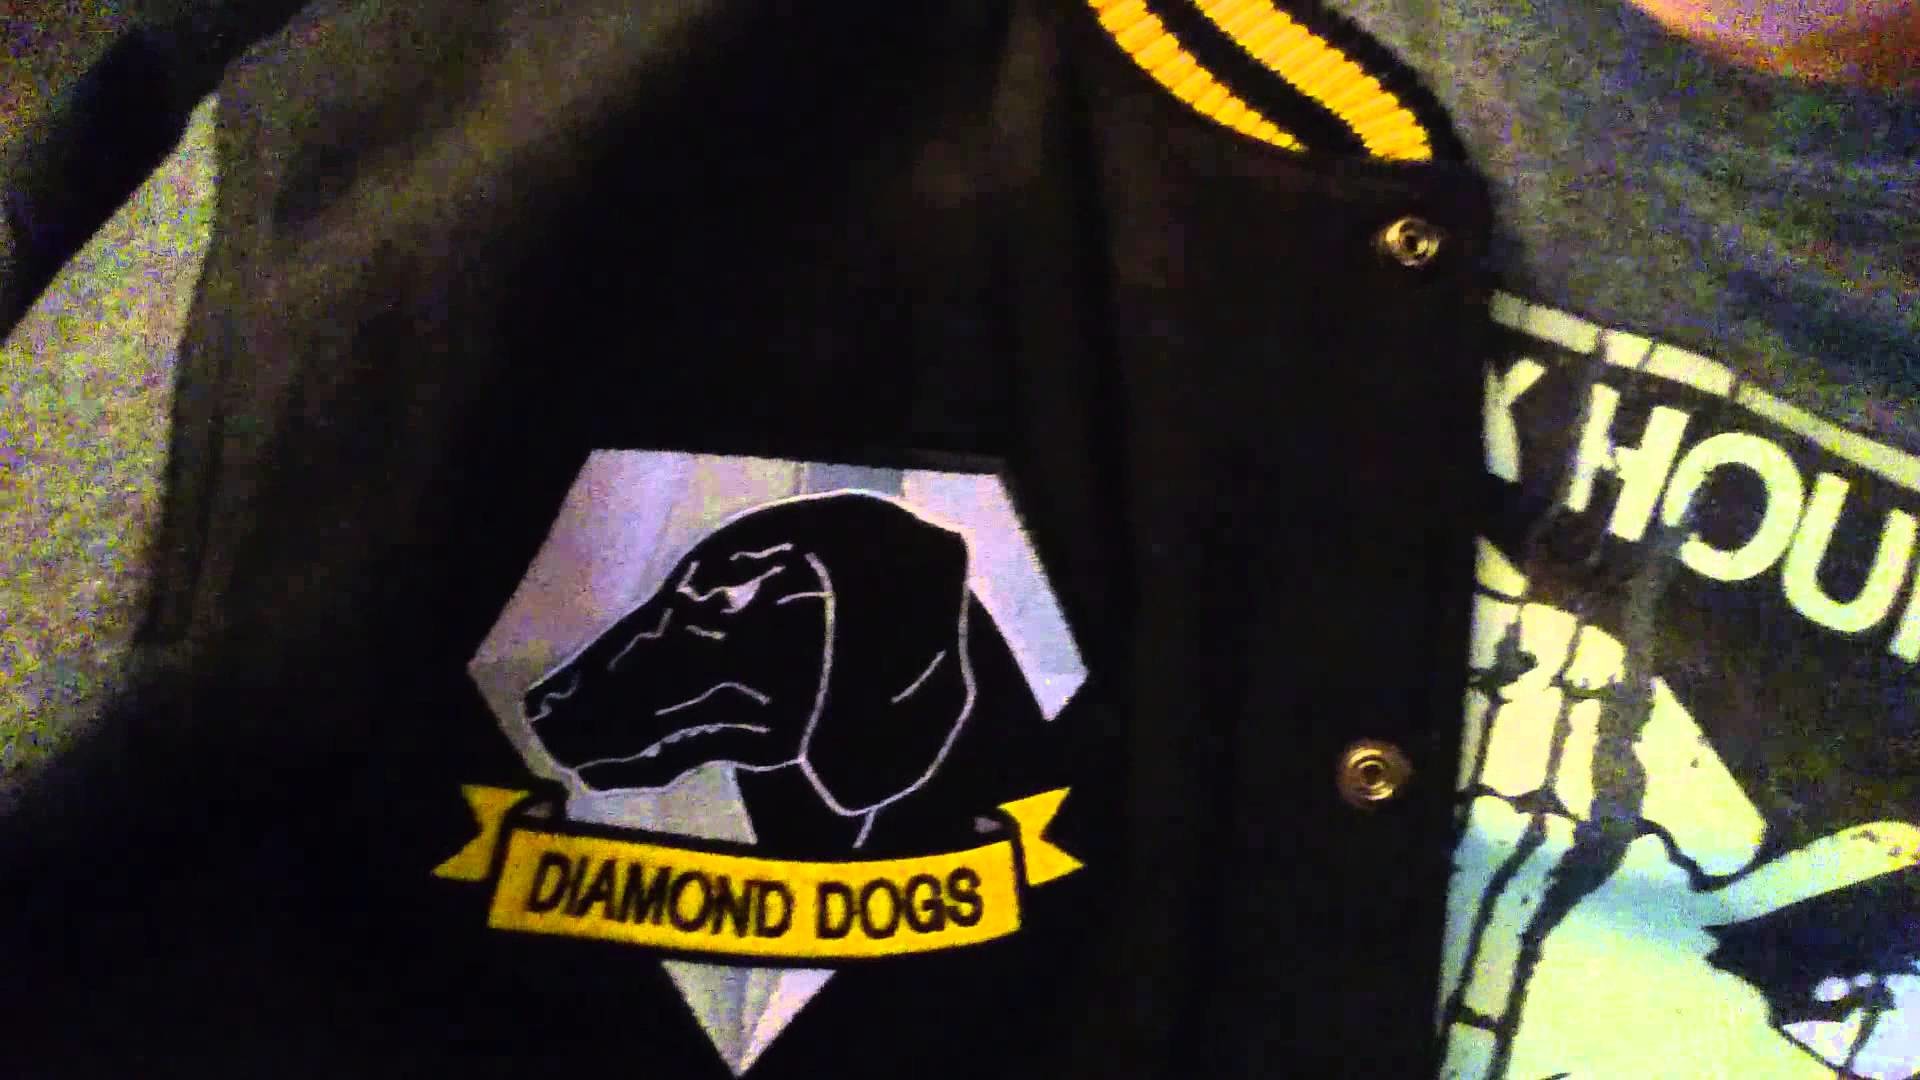 1920x1080 Diamond Dogs. Our new home.